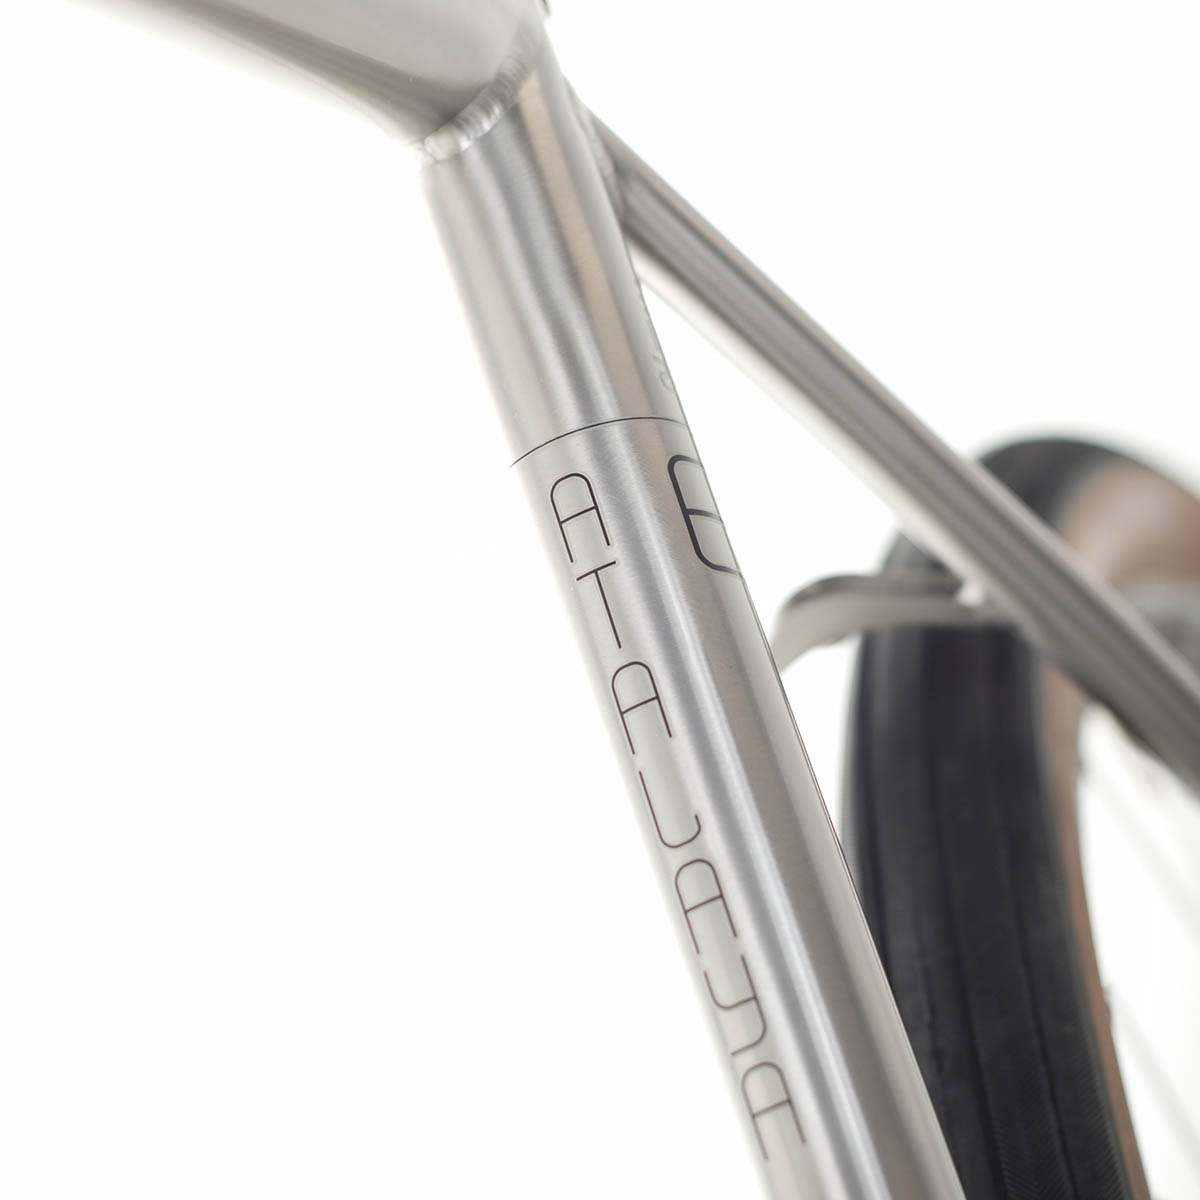 J. Guillem titanium bikes ride into the U.S. with new distribution from Lindarets